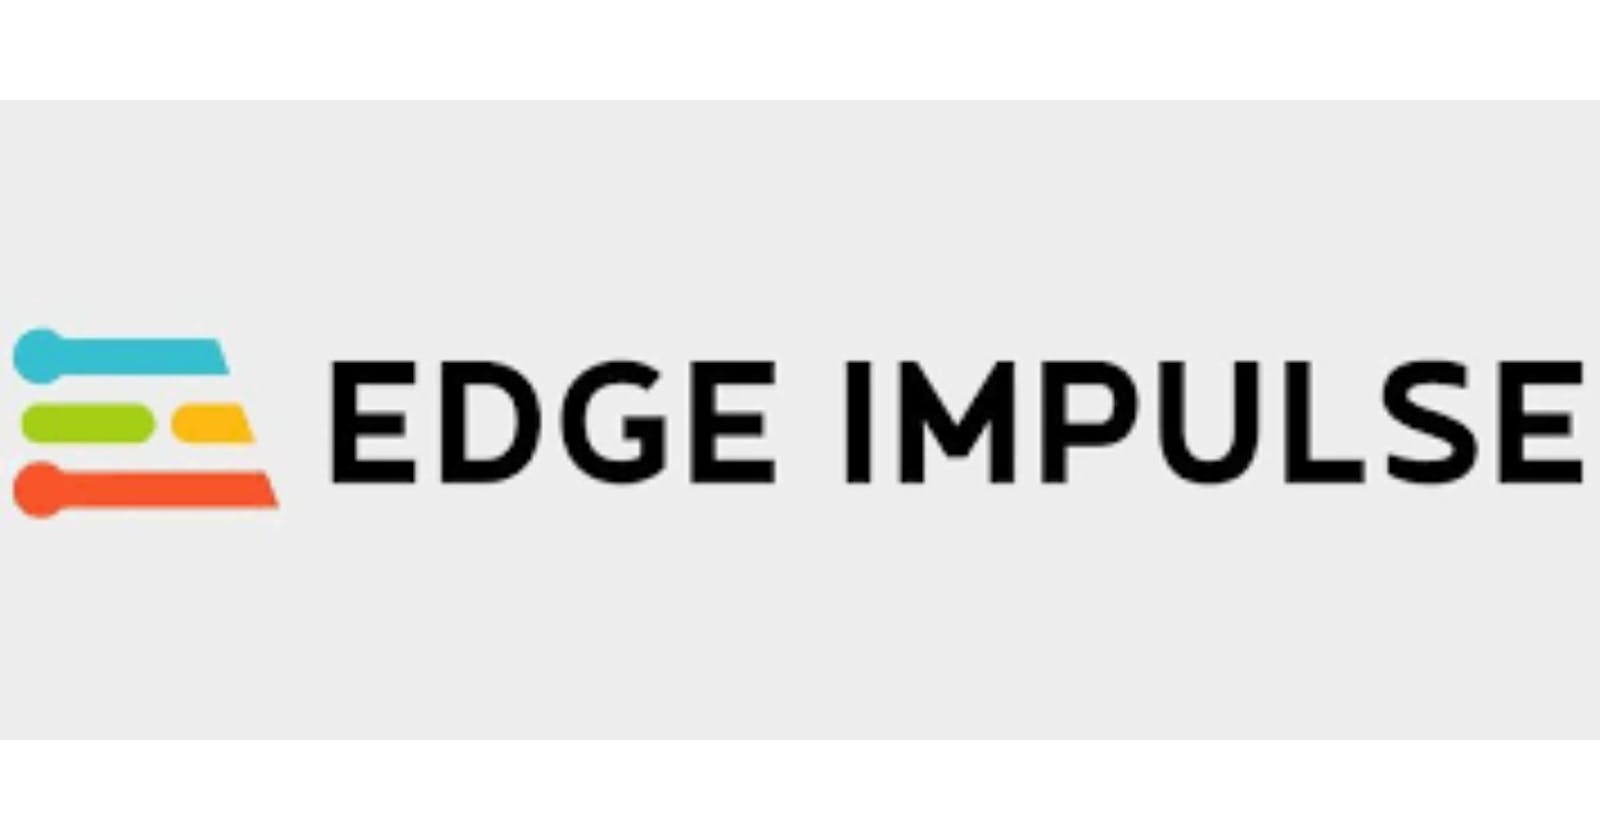 Getting started with Edge Impulse